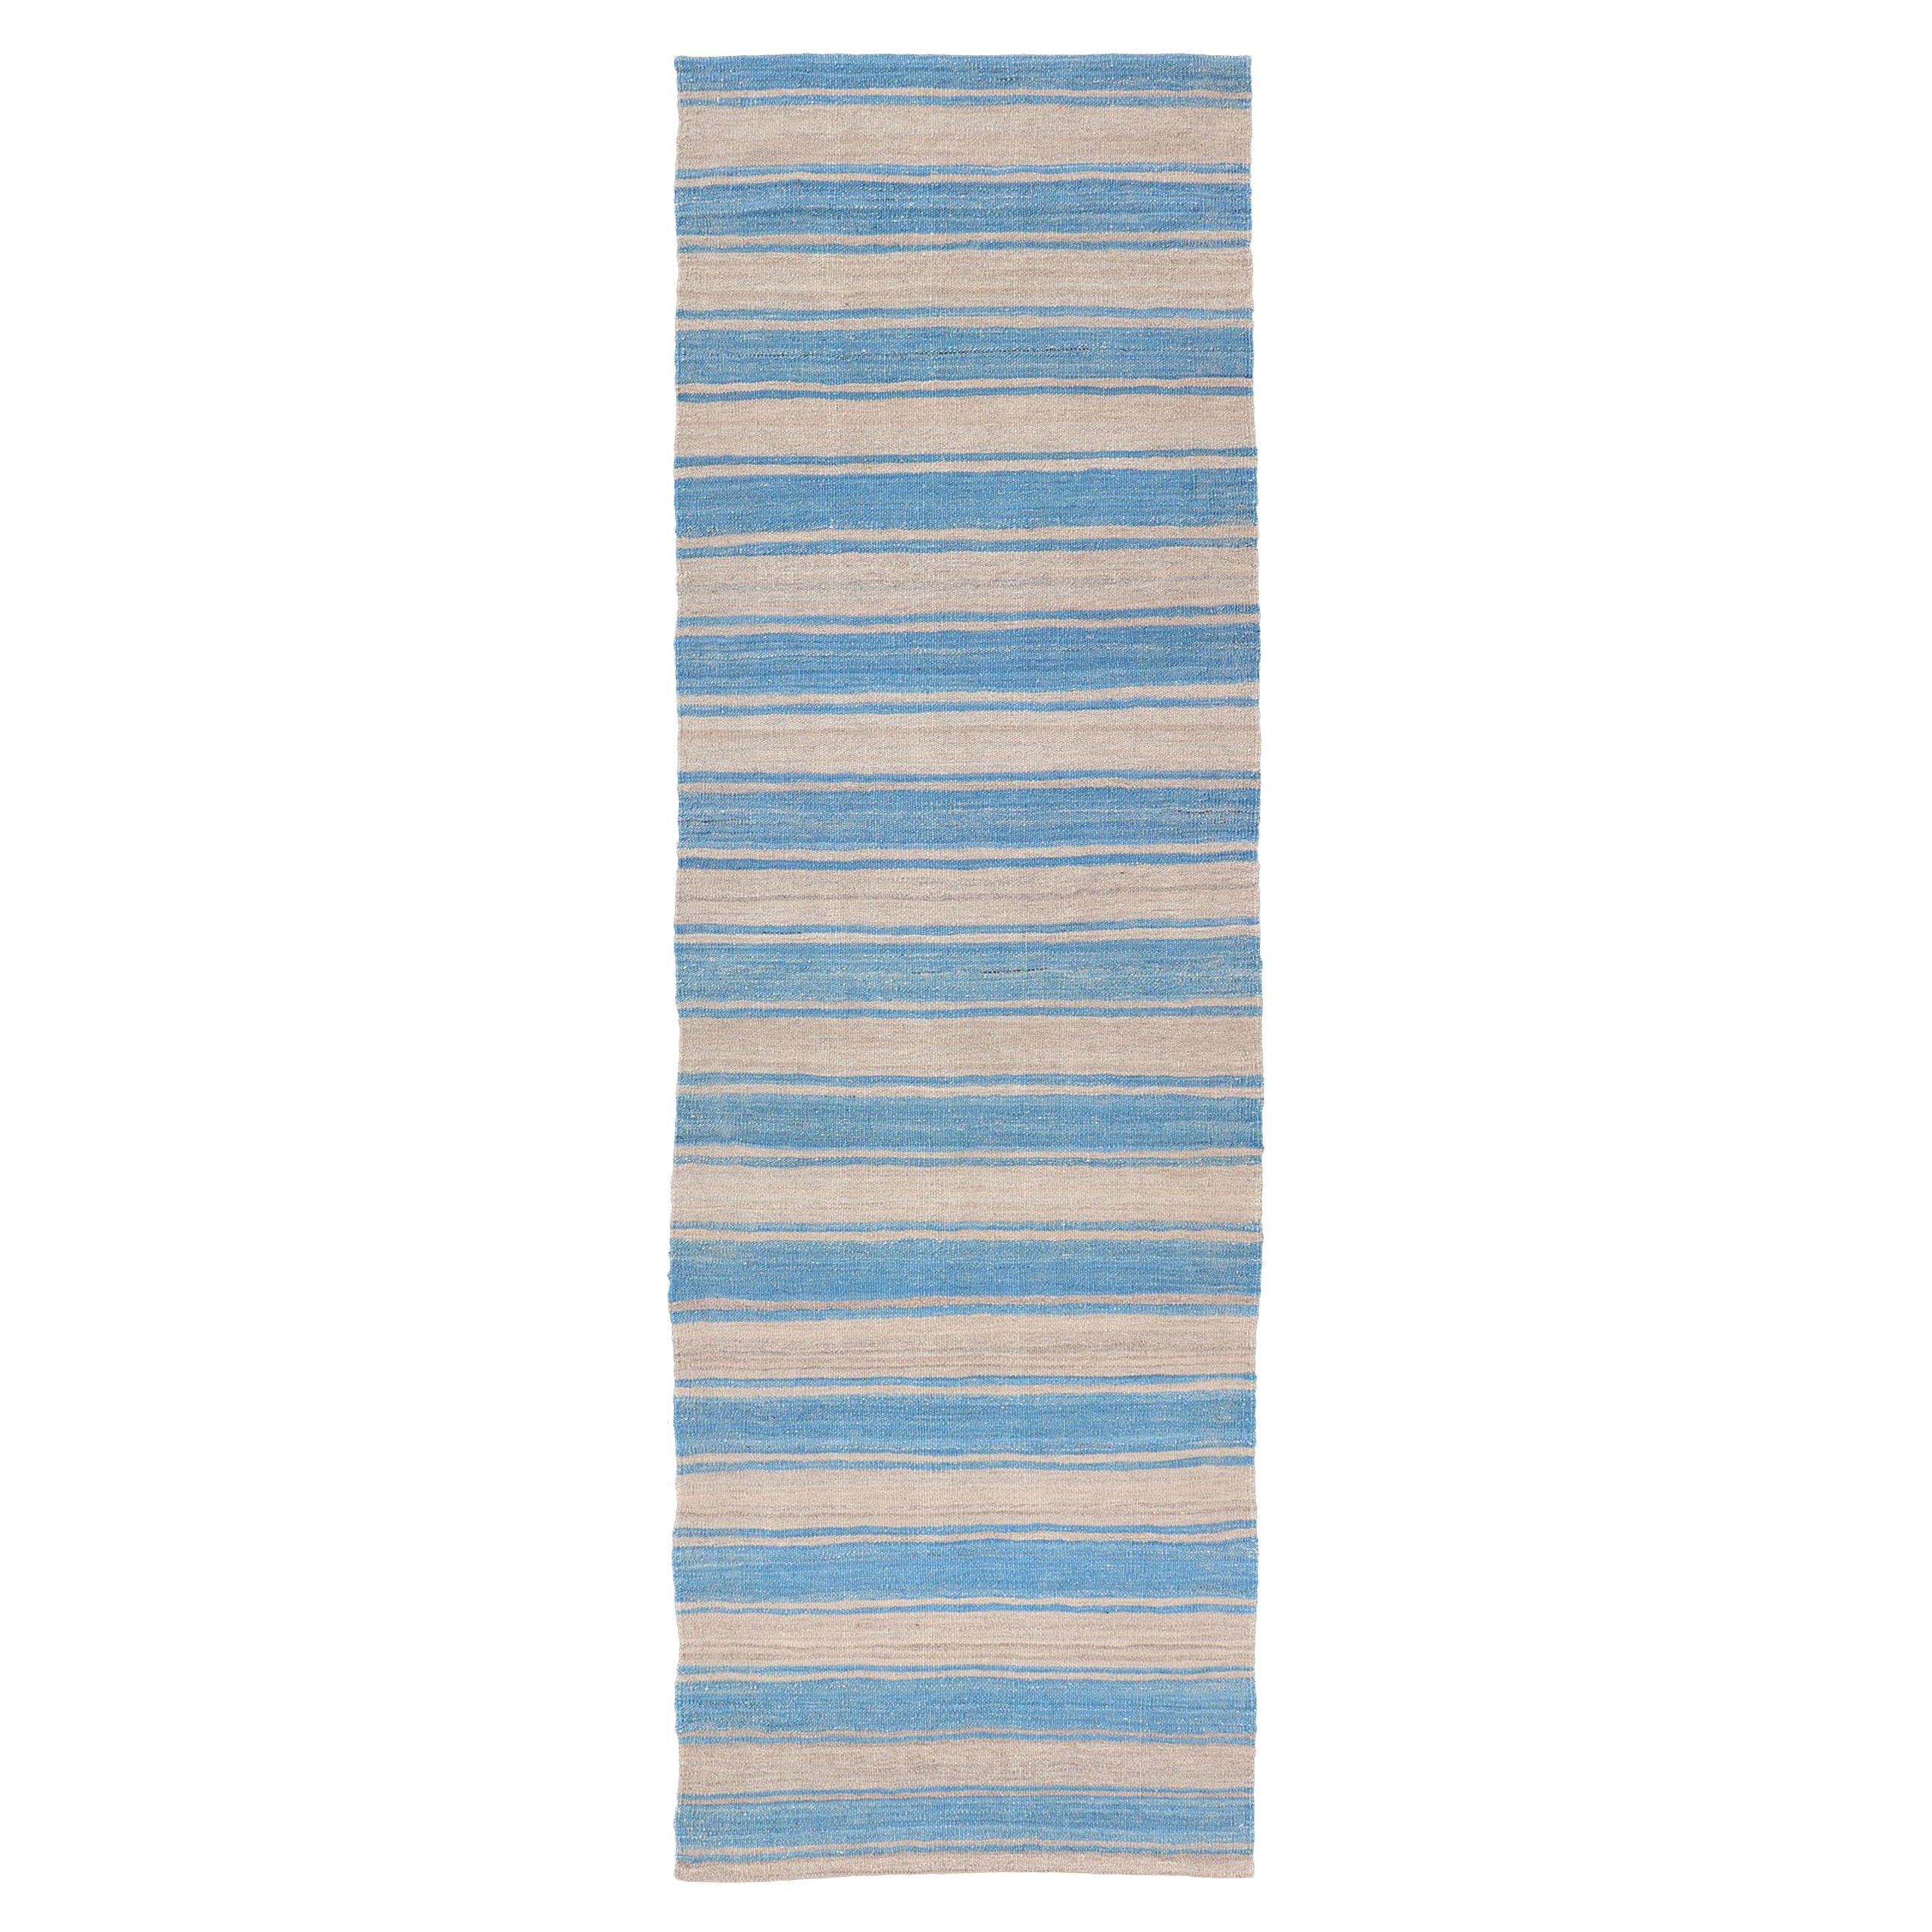 Flat-Weave Modern Kilim Rug with Stripes in Shades of Blue and Gray For Sale